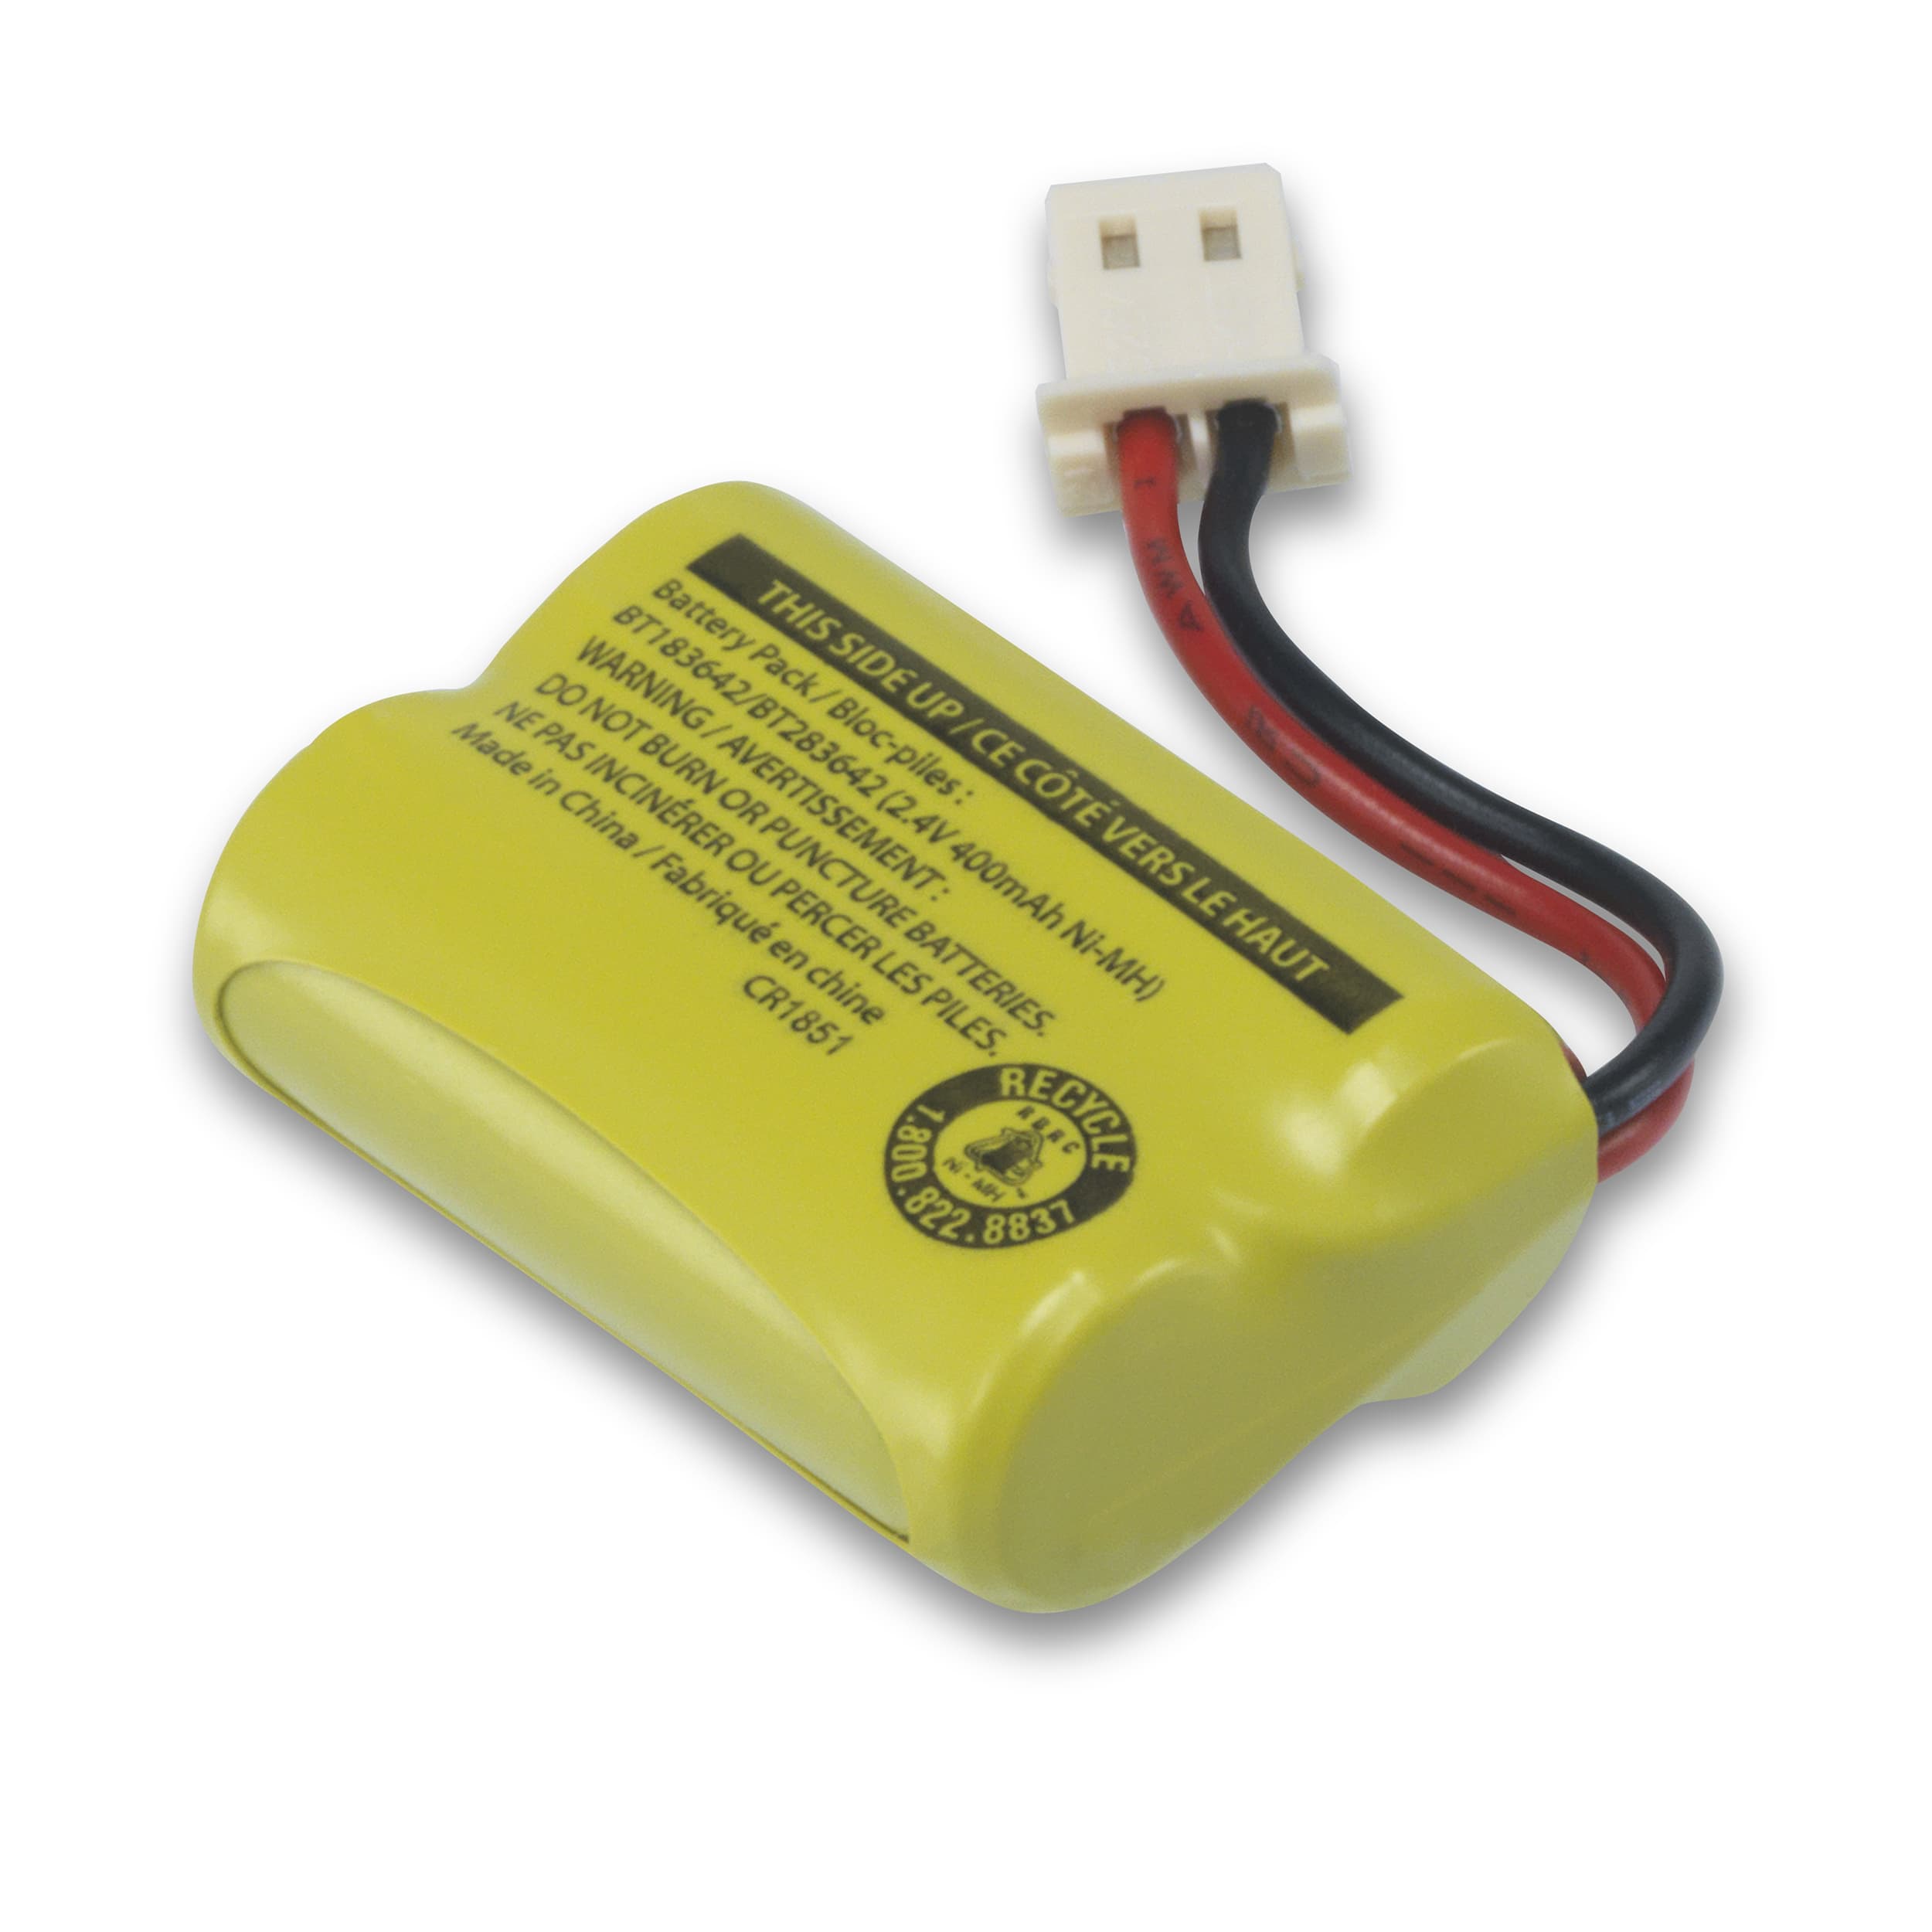 NiMH replacement battery BT283642